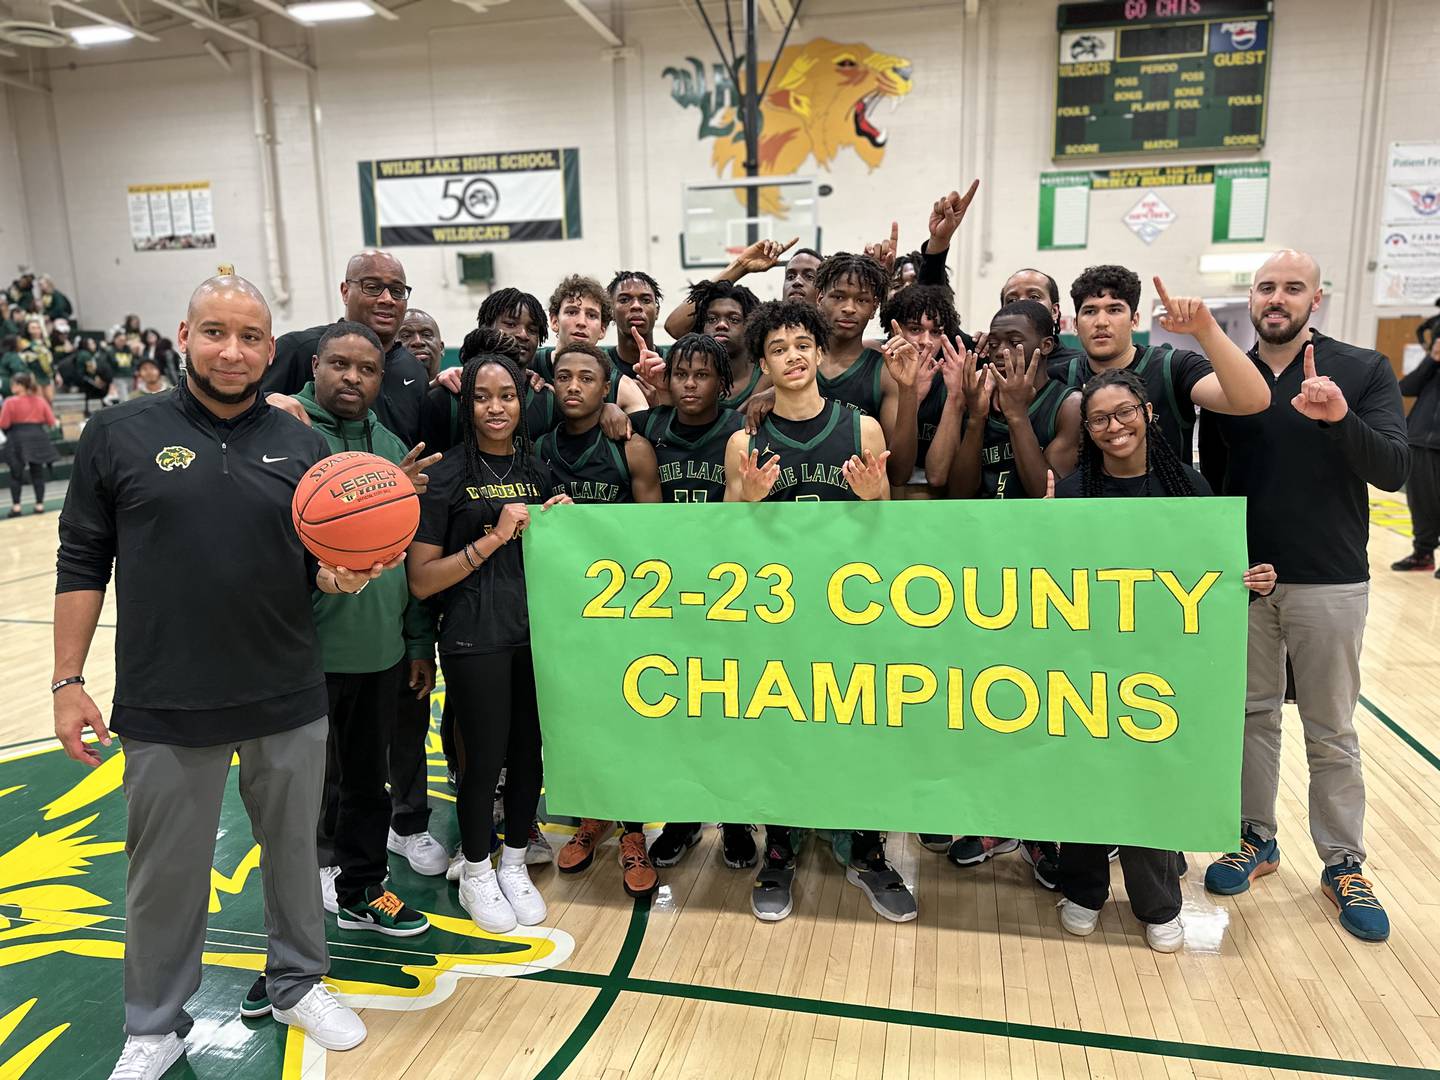 For the first time in four decades, Wilde Lake's boys basketball team are Howard County champions. The Wildecats secured the crown with a 65-55 victory over Glenelg in Columbia Thursday evening.